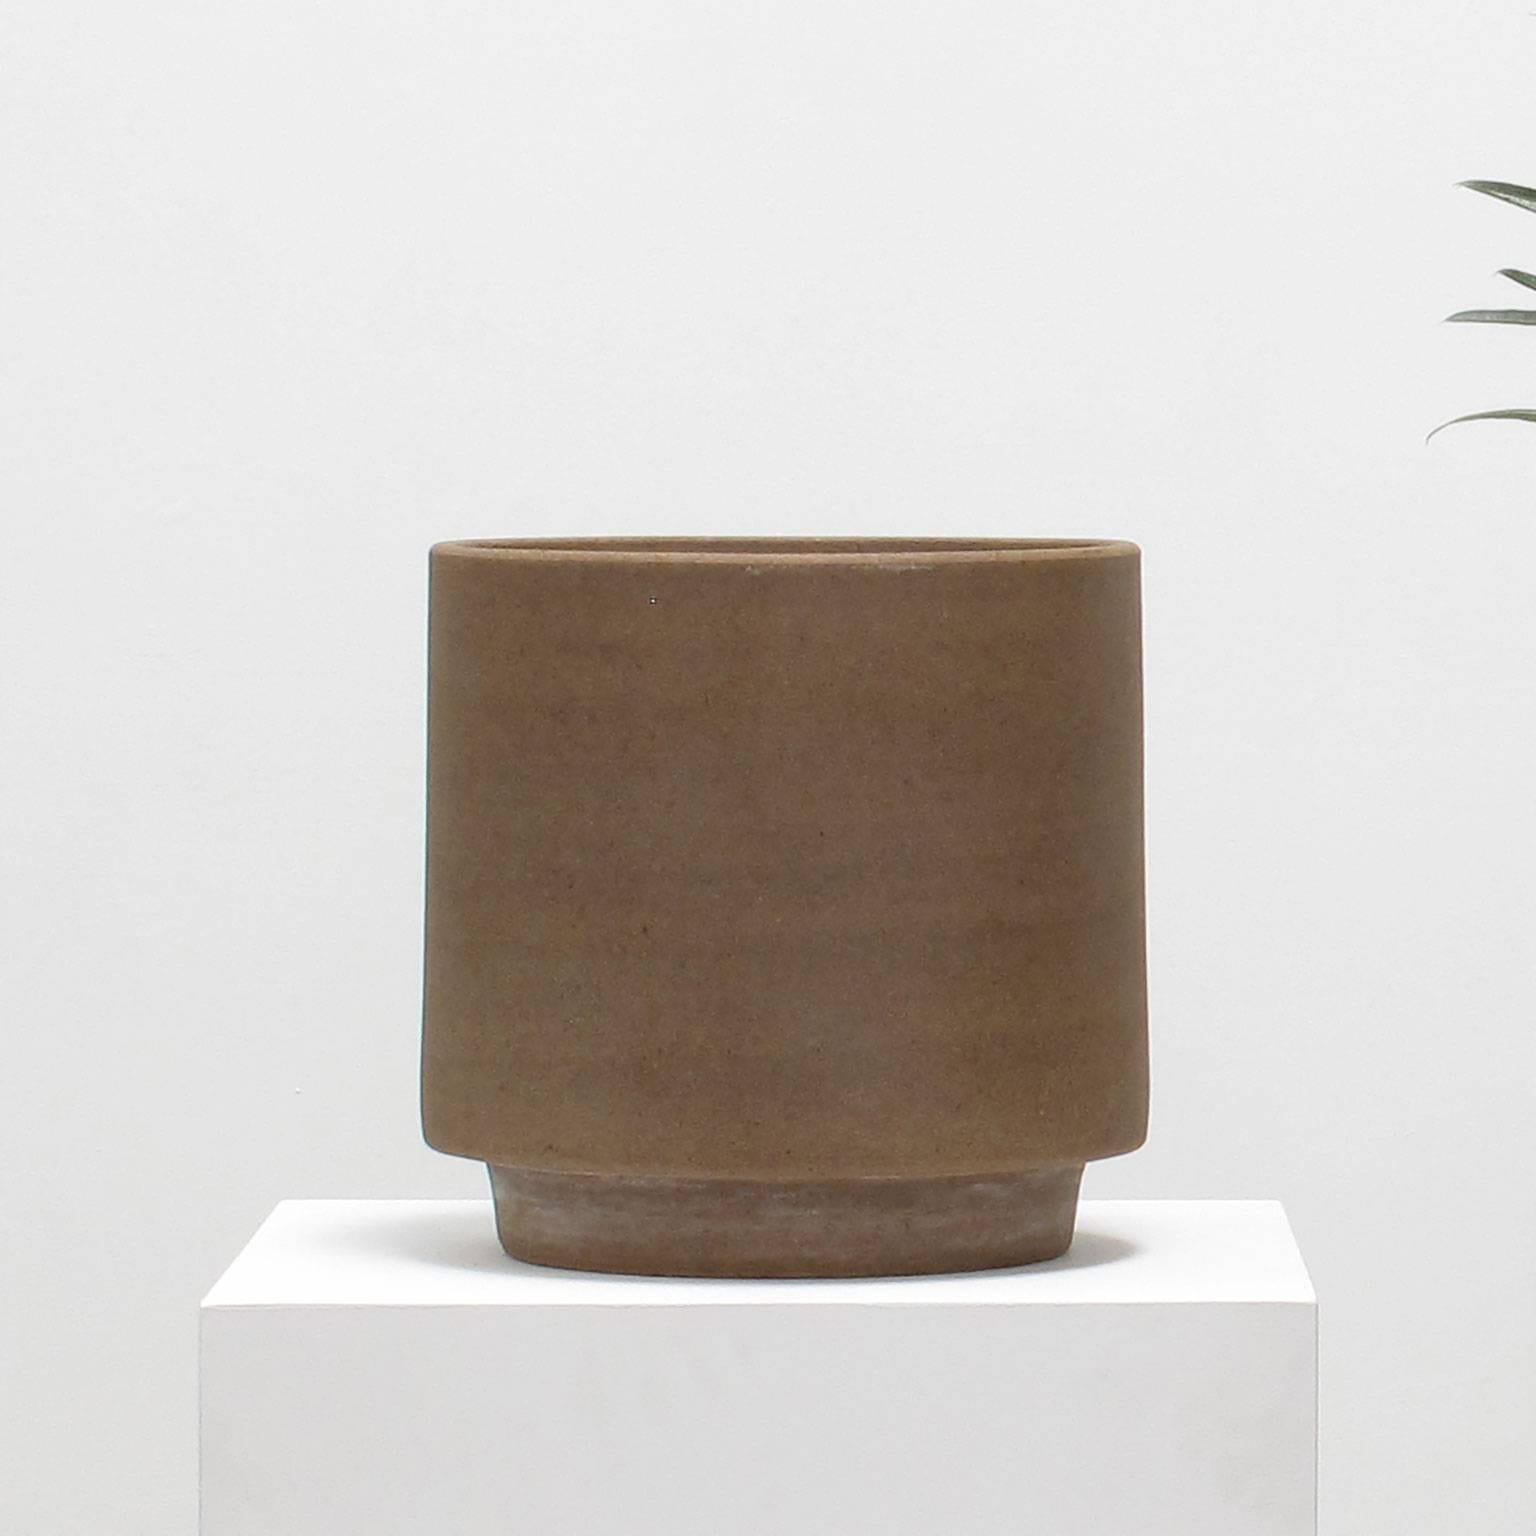 David Cressey footed planter, stoneware, unglazed, 1960s, architectural pottery, Los Angeles, California. Measures: 13.5 high x 13.75 diameter inches (34.3 high x 35 diameter cm).